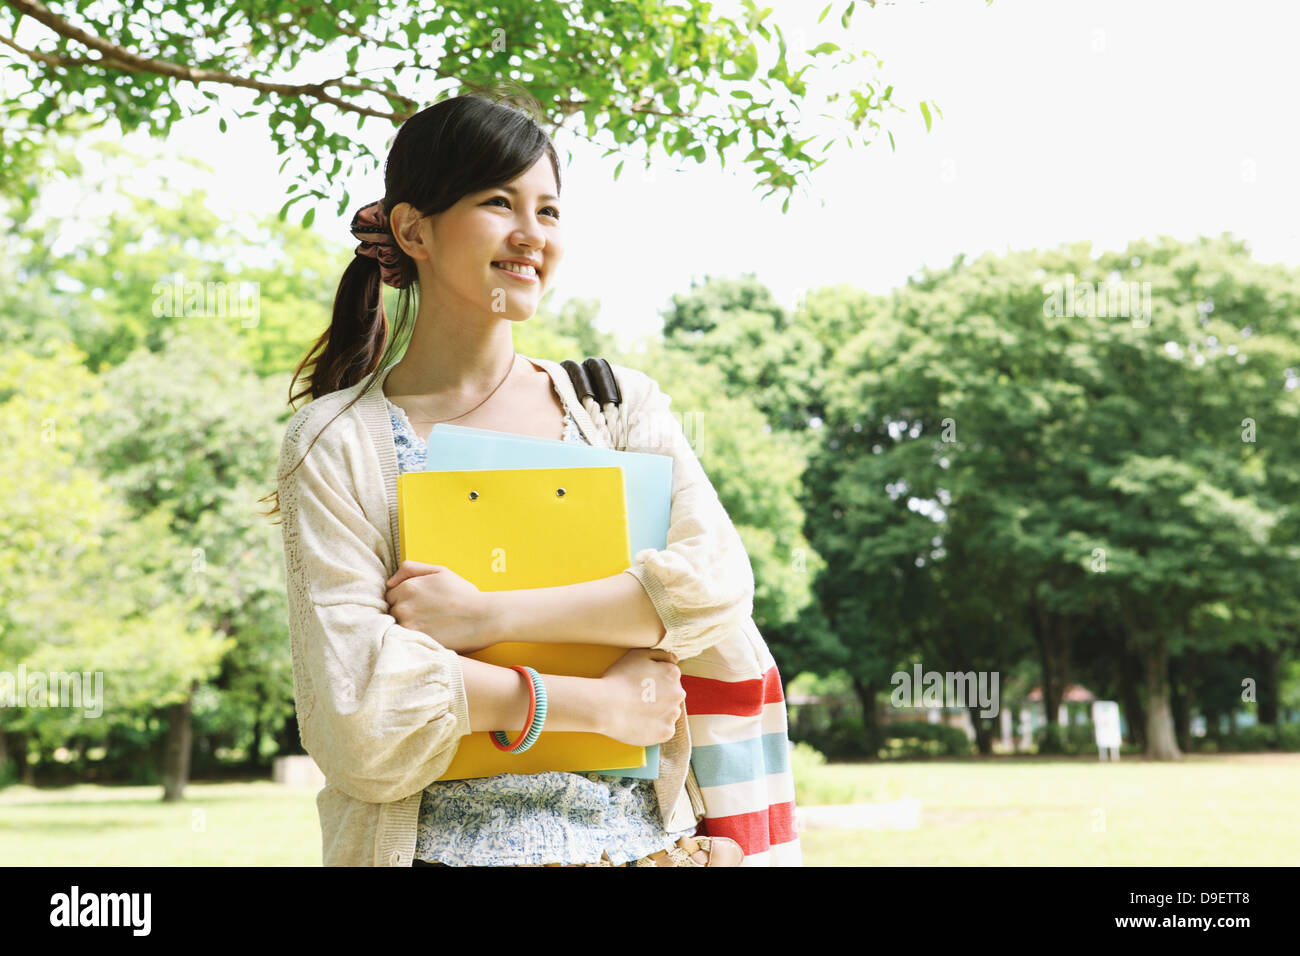 Female college student in a park smiling away Stock Photo